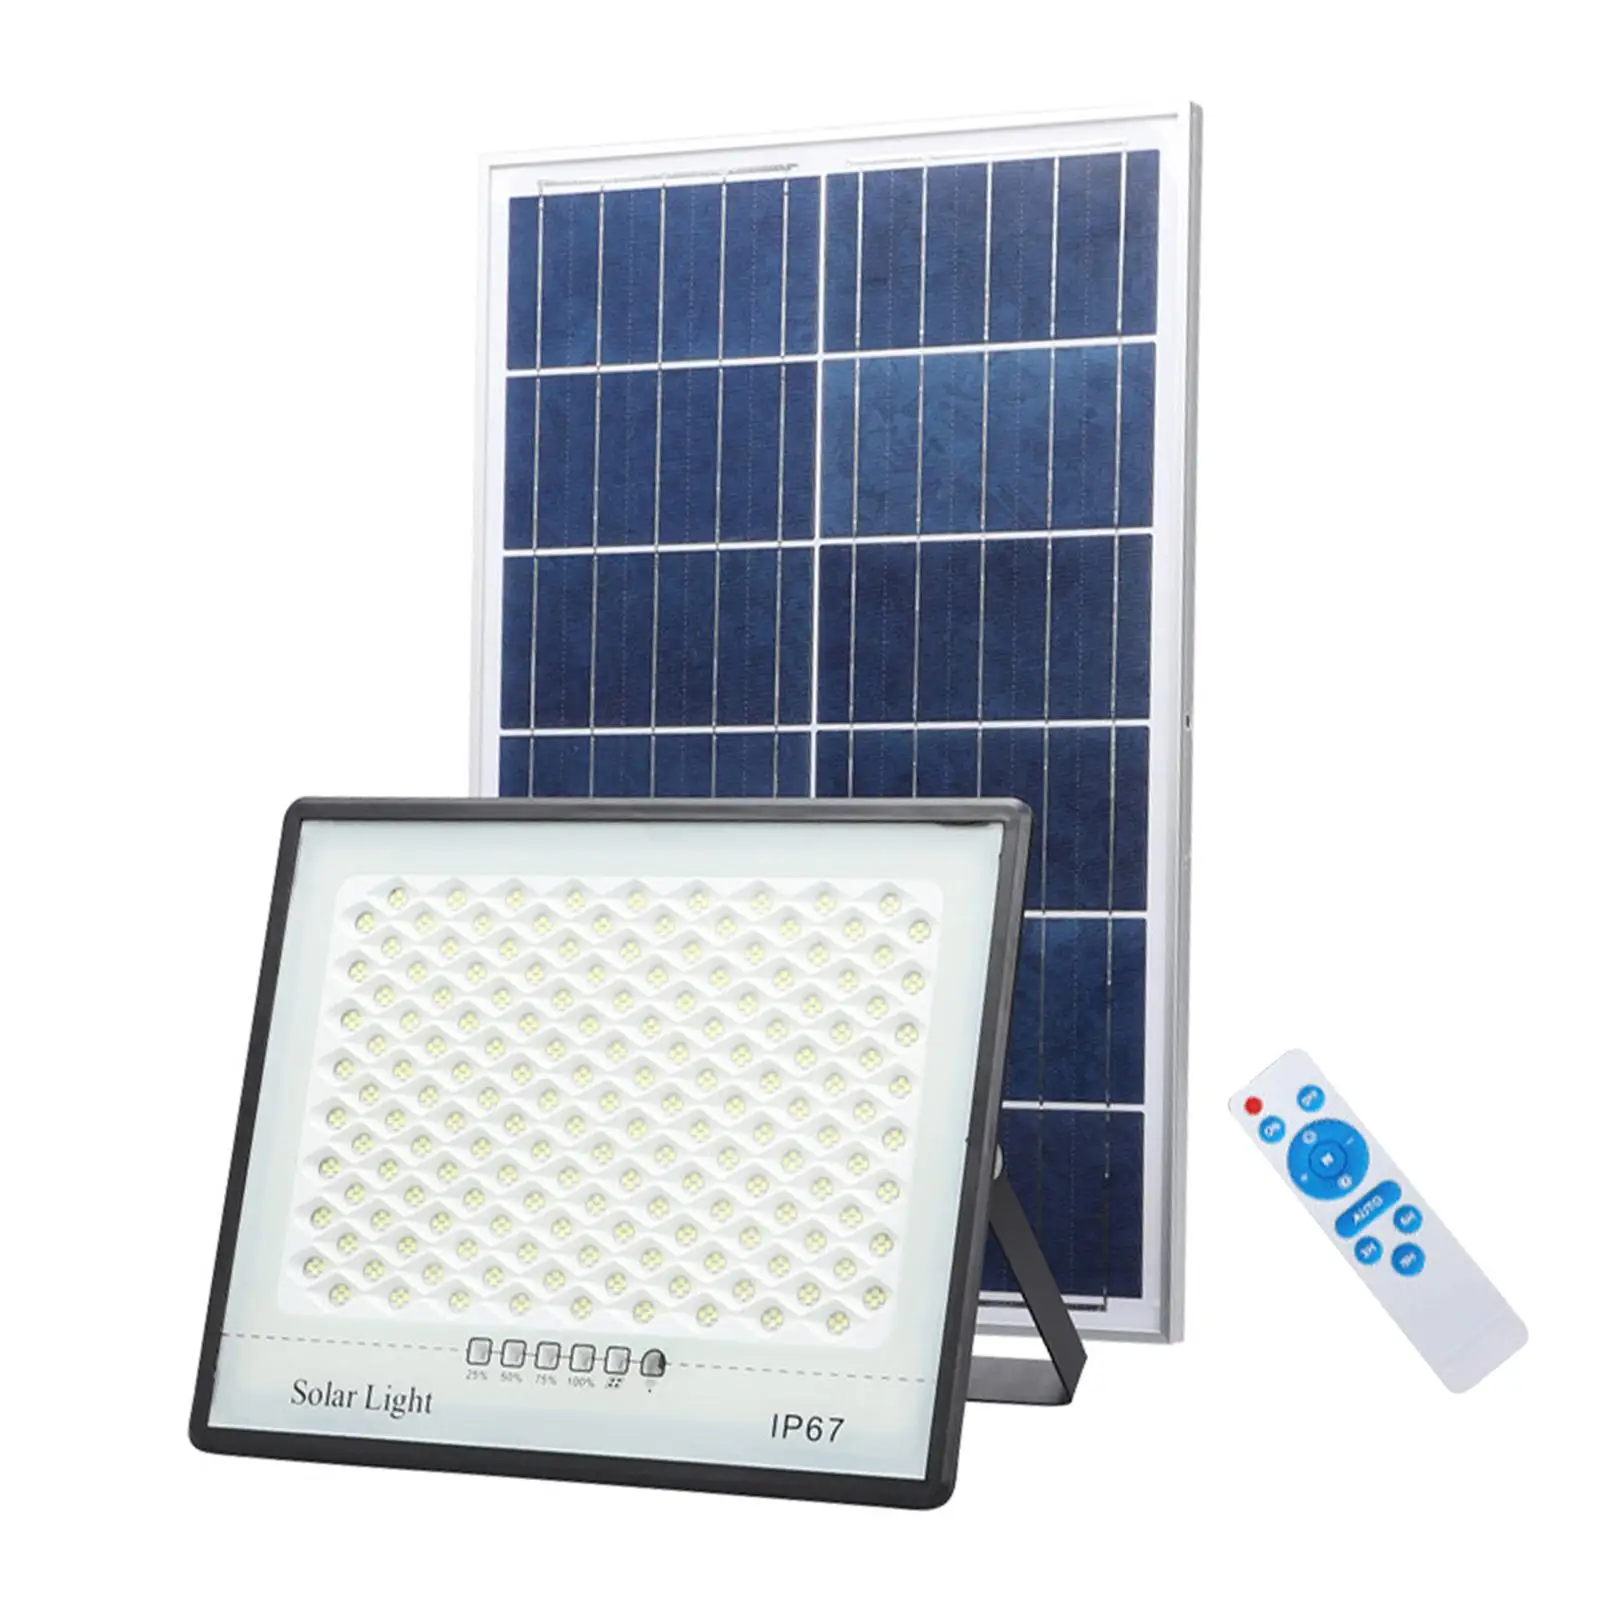 Solar Light Solar Lights IP67 Waterproof with Remote Control 100W Wall LED Spotlights for Yard Pathway Garden Shed Swimming Pool